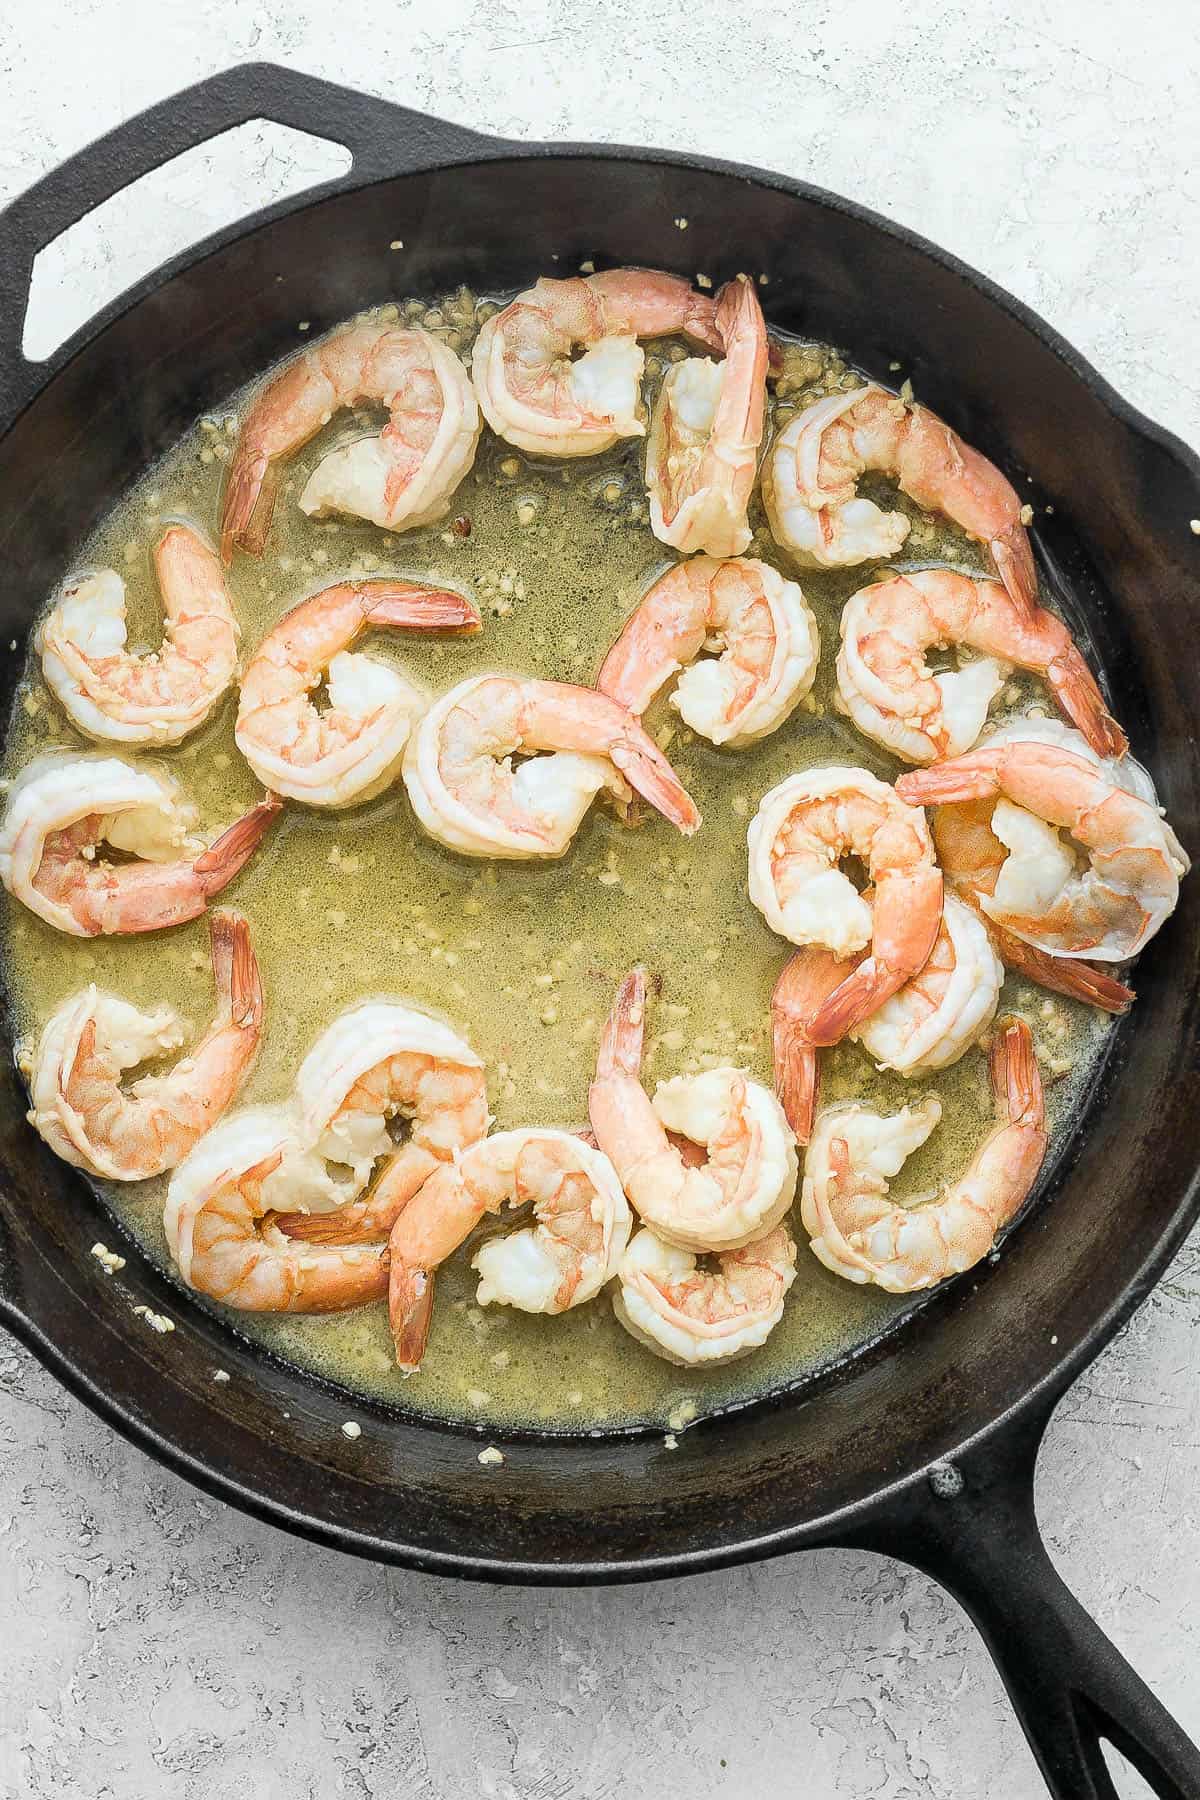 Shrimp added to the pan and cooked for a few minutes.